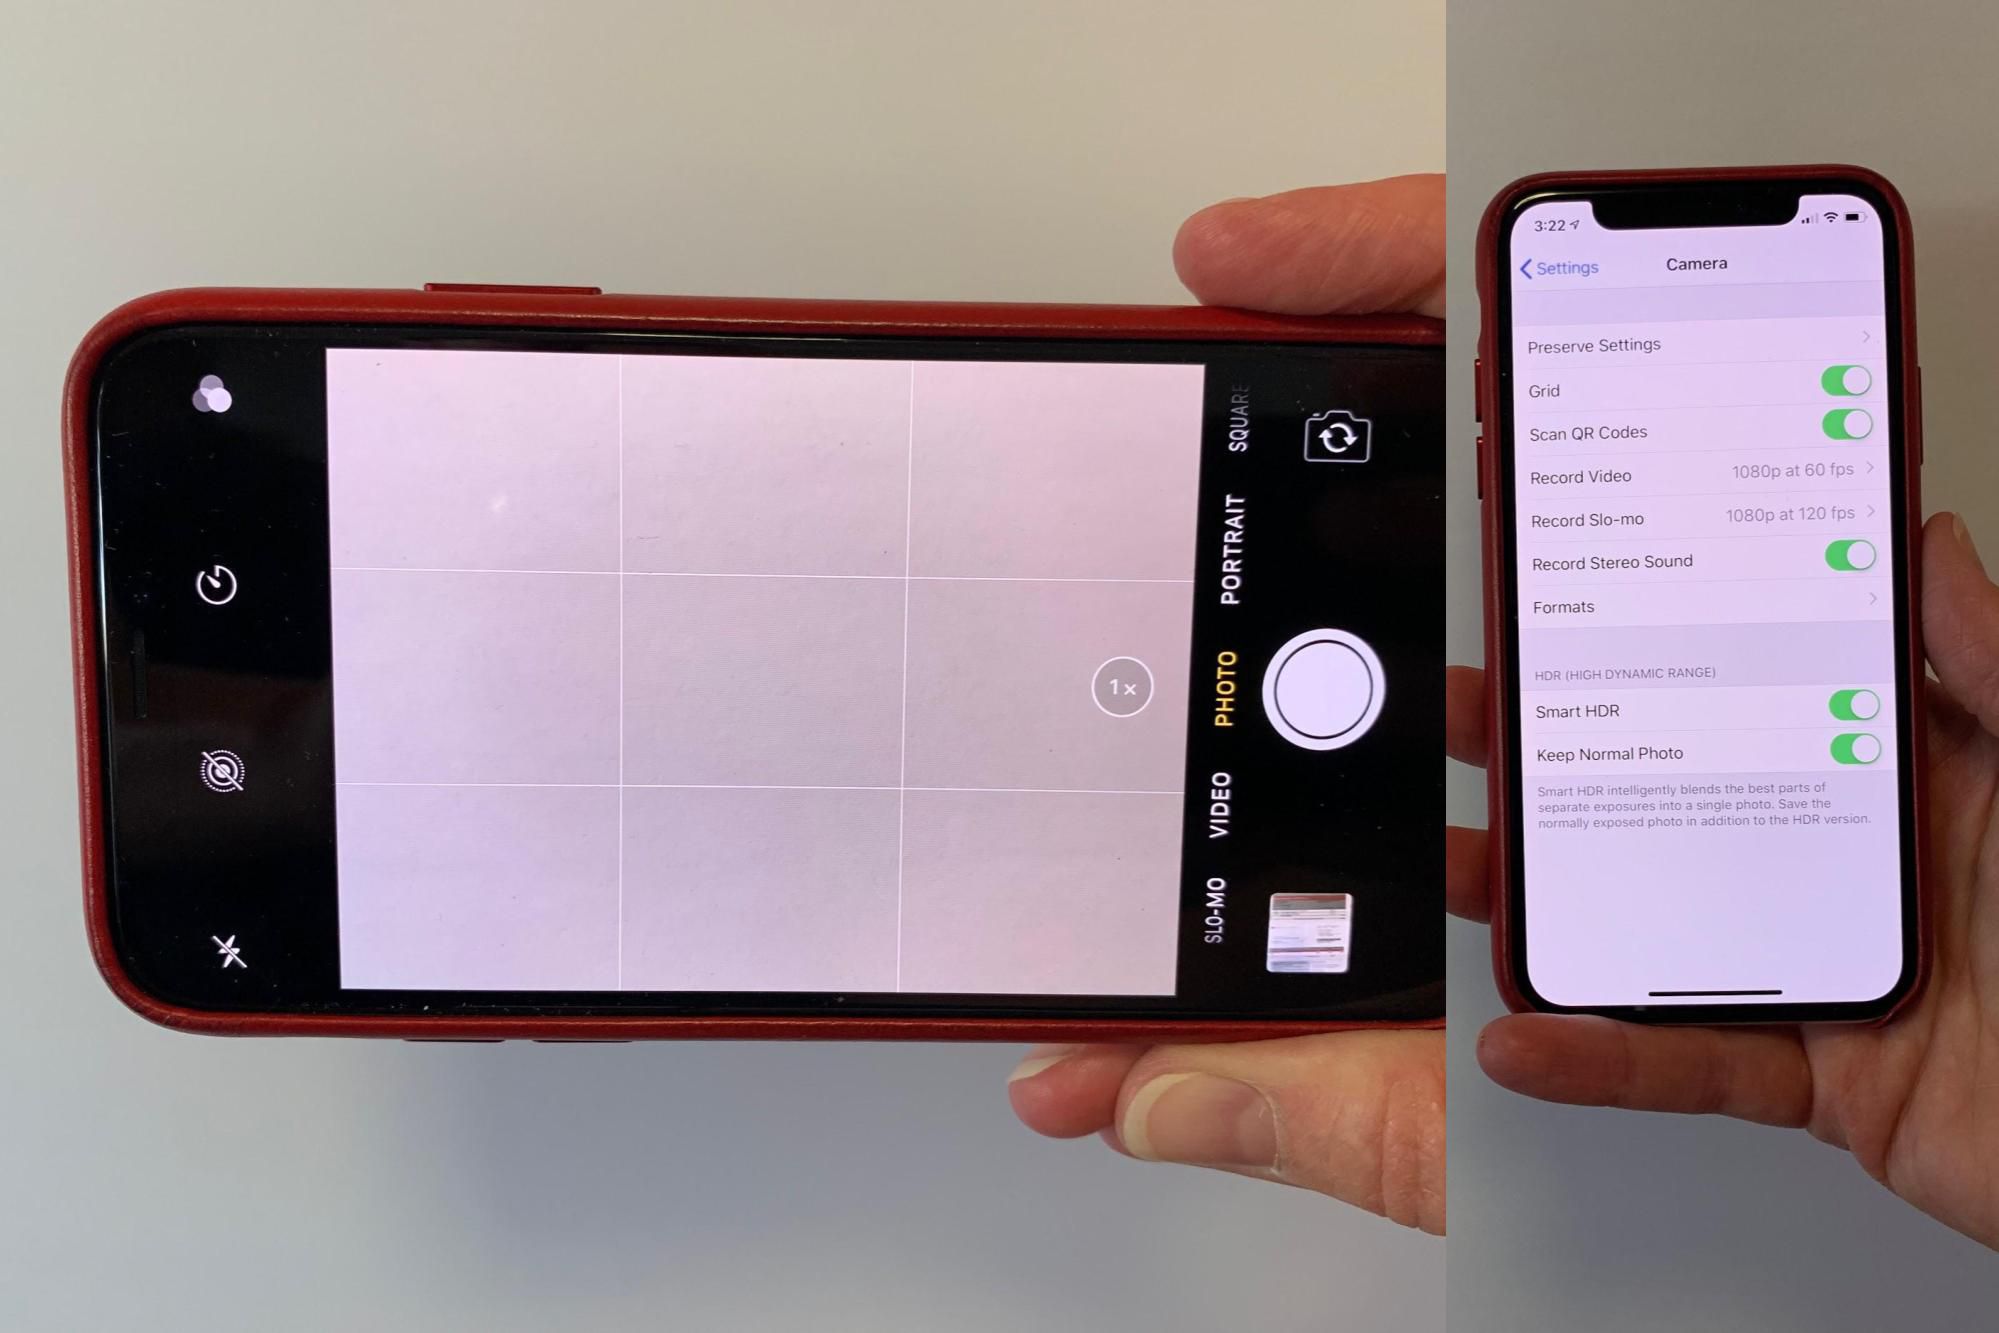 how to get grid on iphone camera